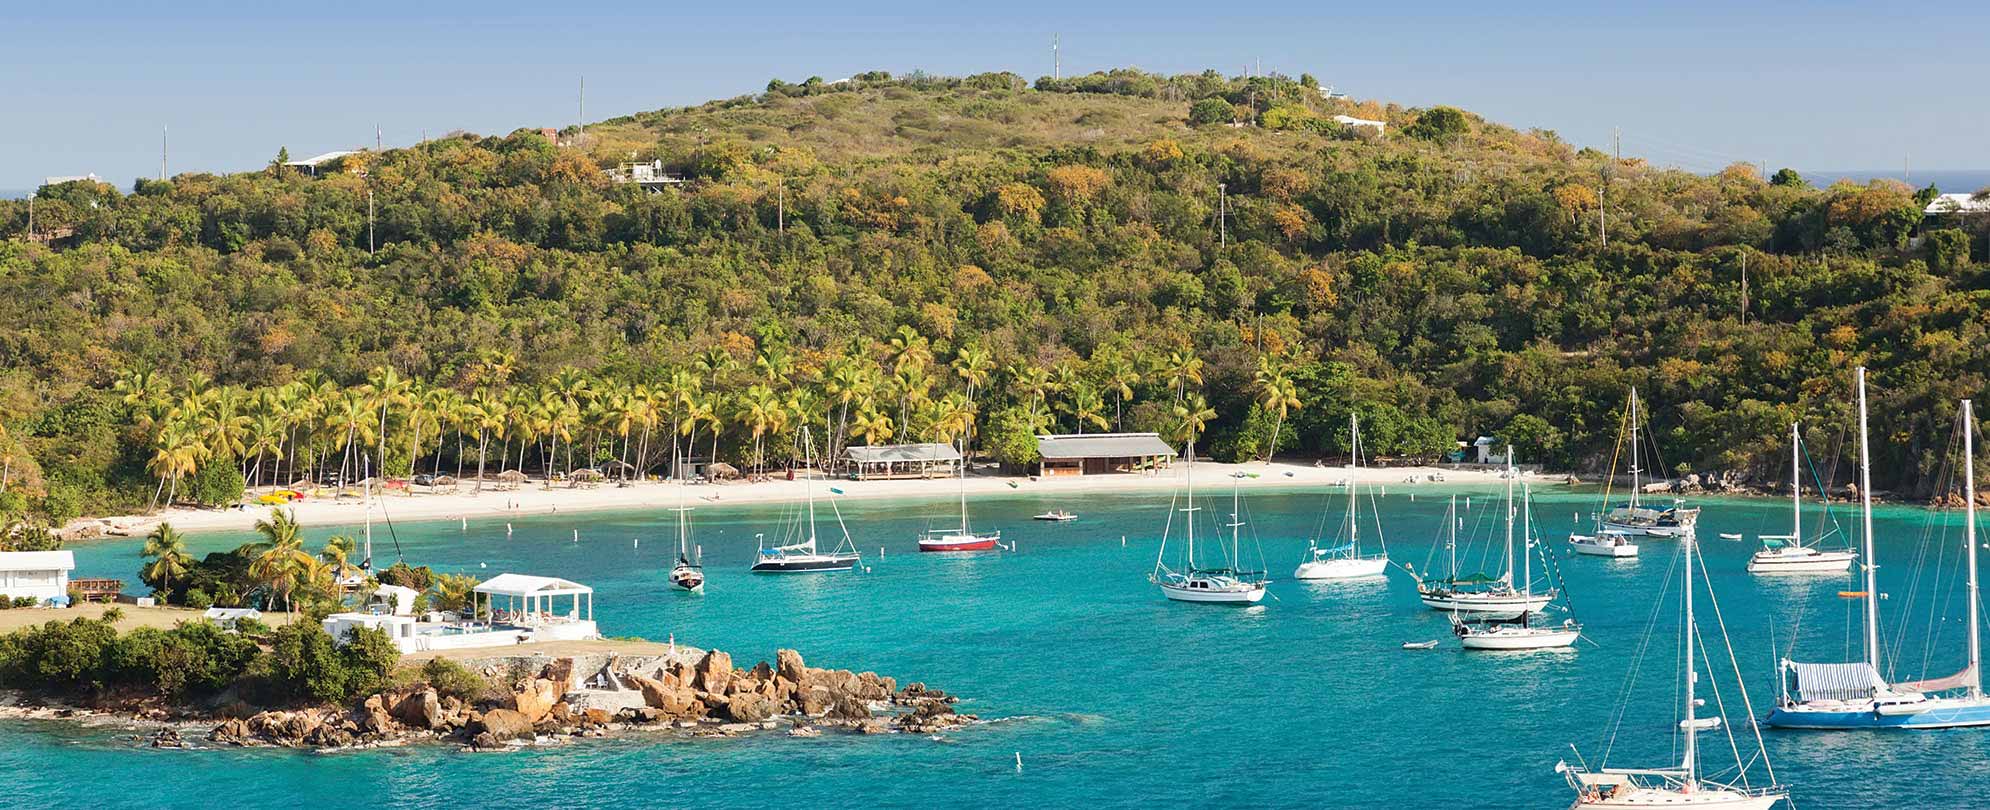 Several sailboats anchor in the bay while on vacation at Virgin Islands National Park in St. John